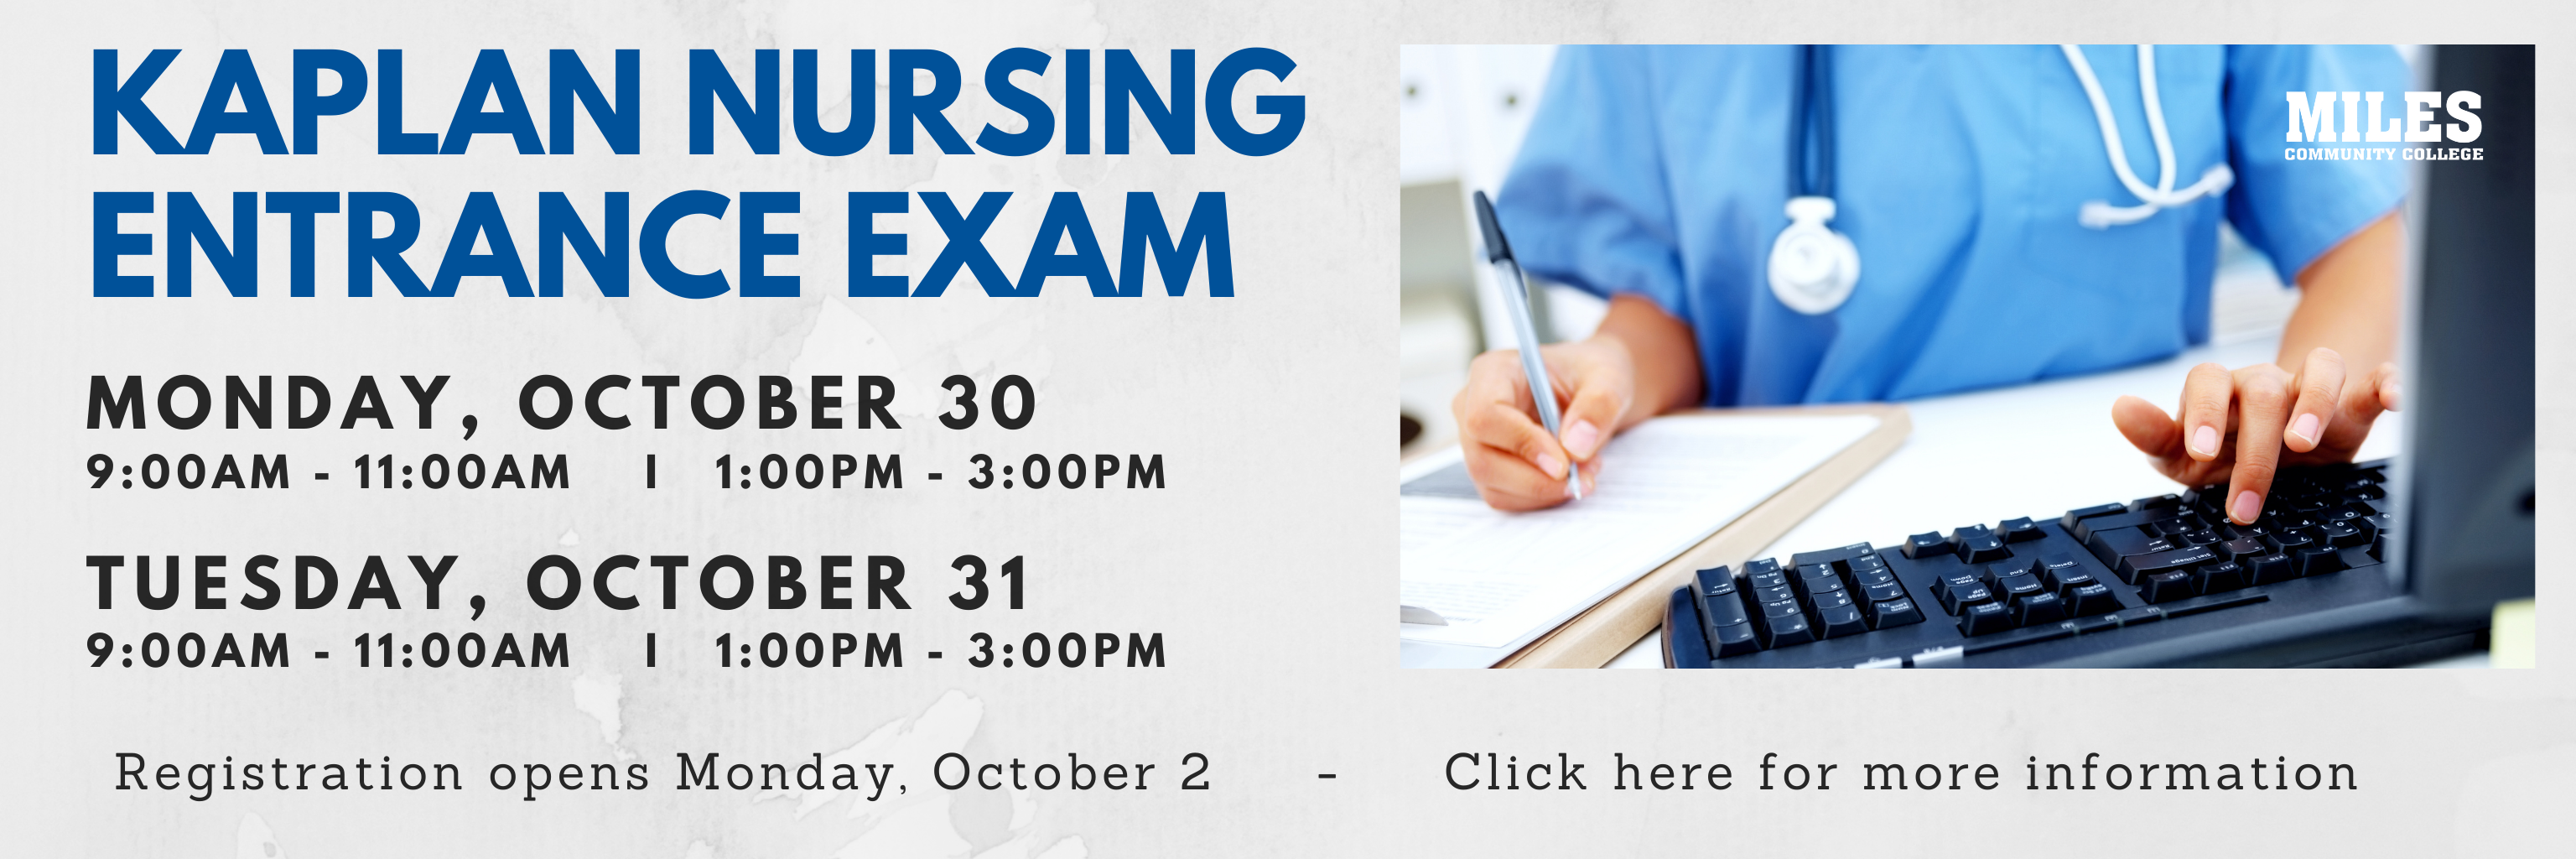 Graphic with text 'Kaplan Nursing Entrance Exam' with image of nurse at computer